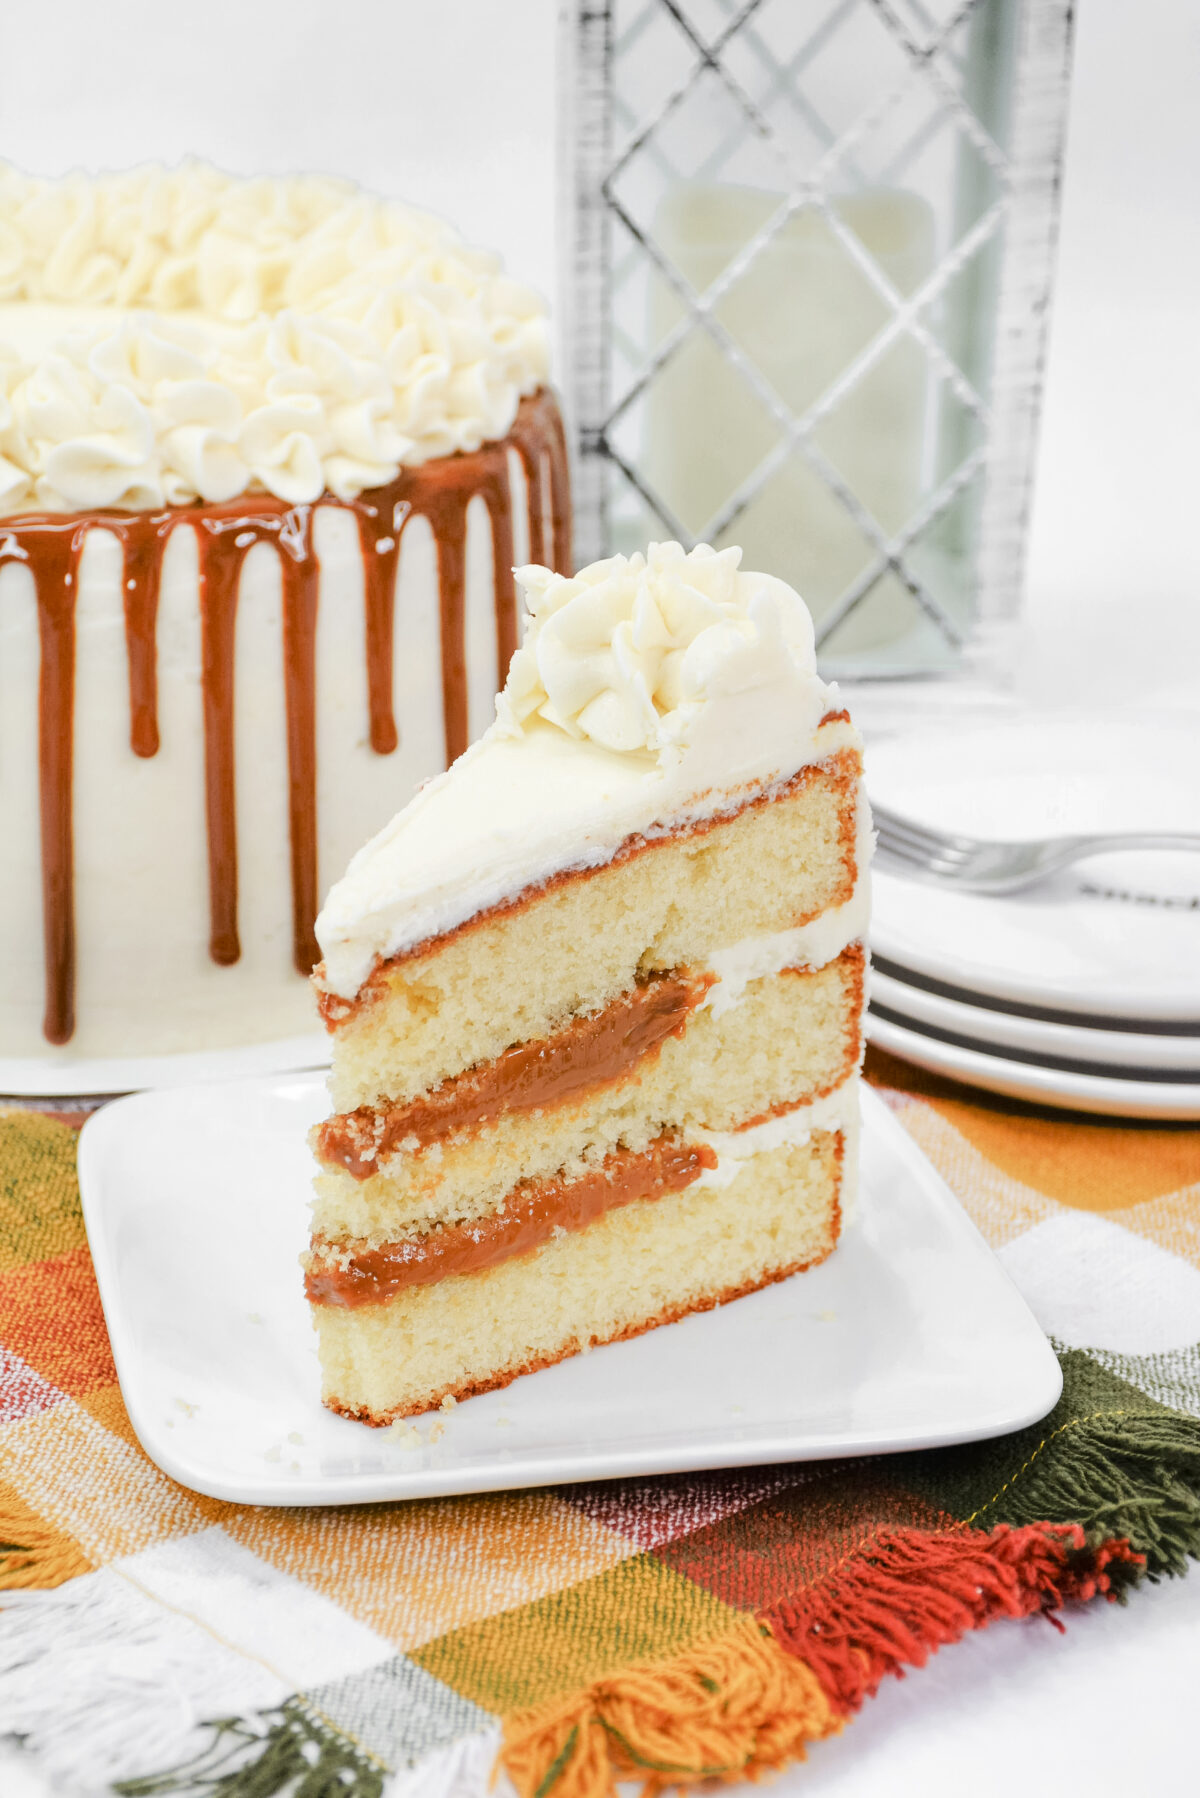 Indulge in the ultimate Dulce De Leche Cake with our irresistible recipe. Layer upon layer of rich, creamy caramel goodness awaits you.